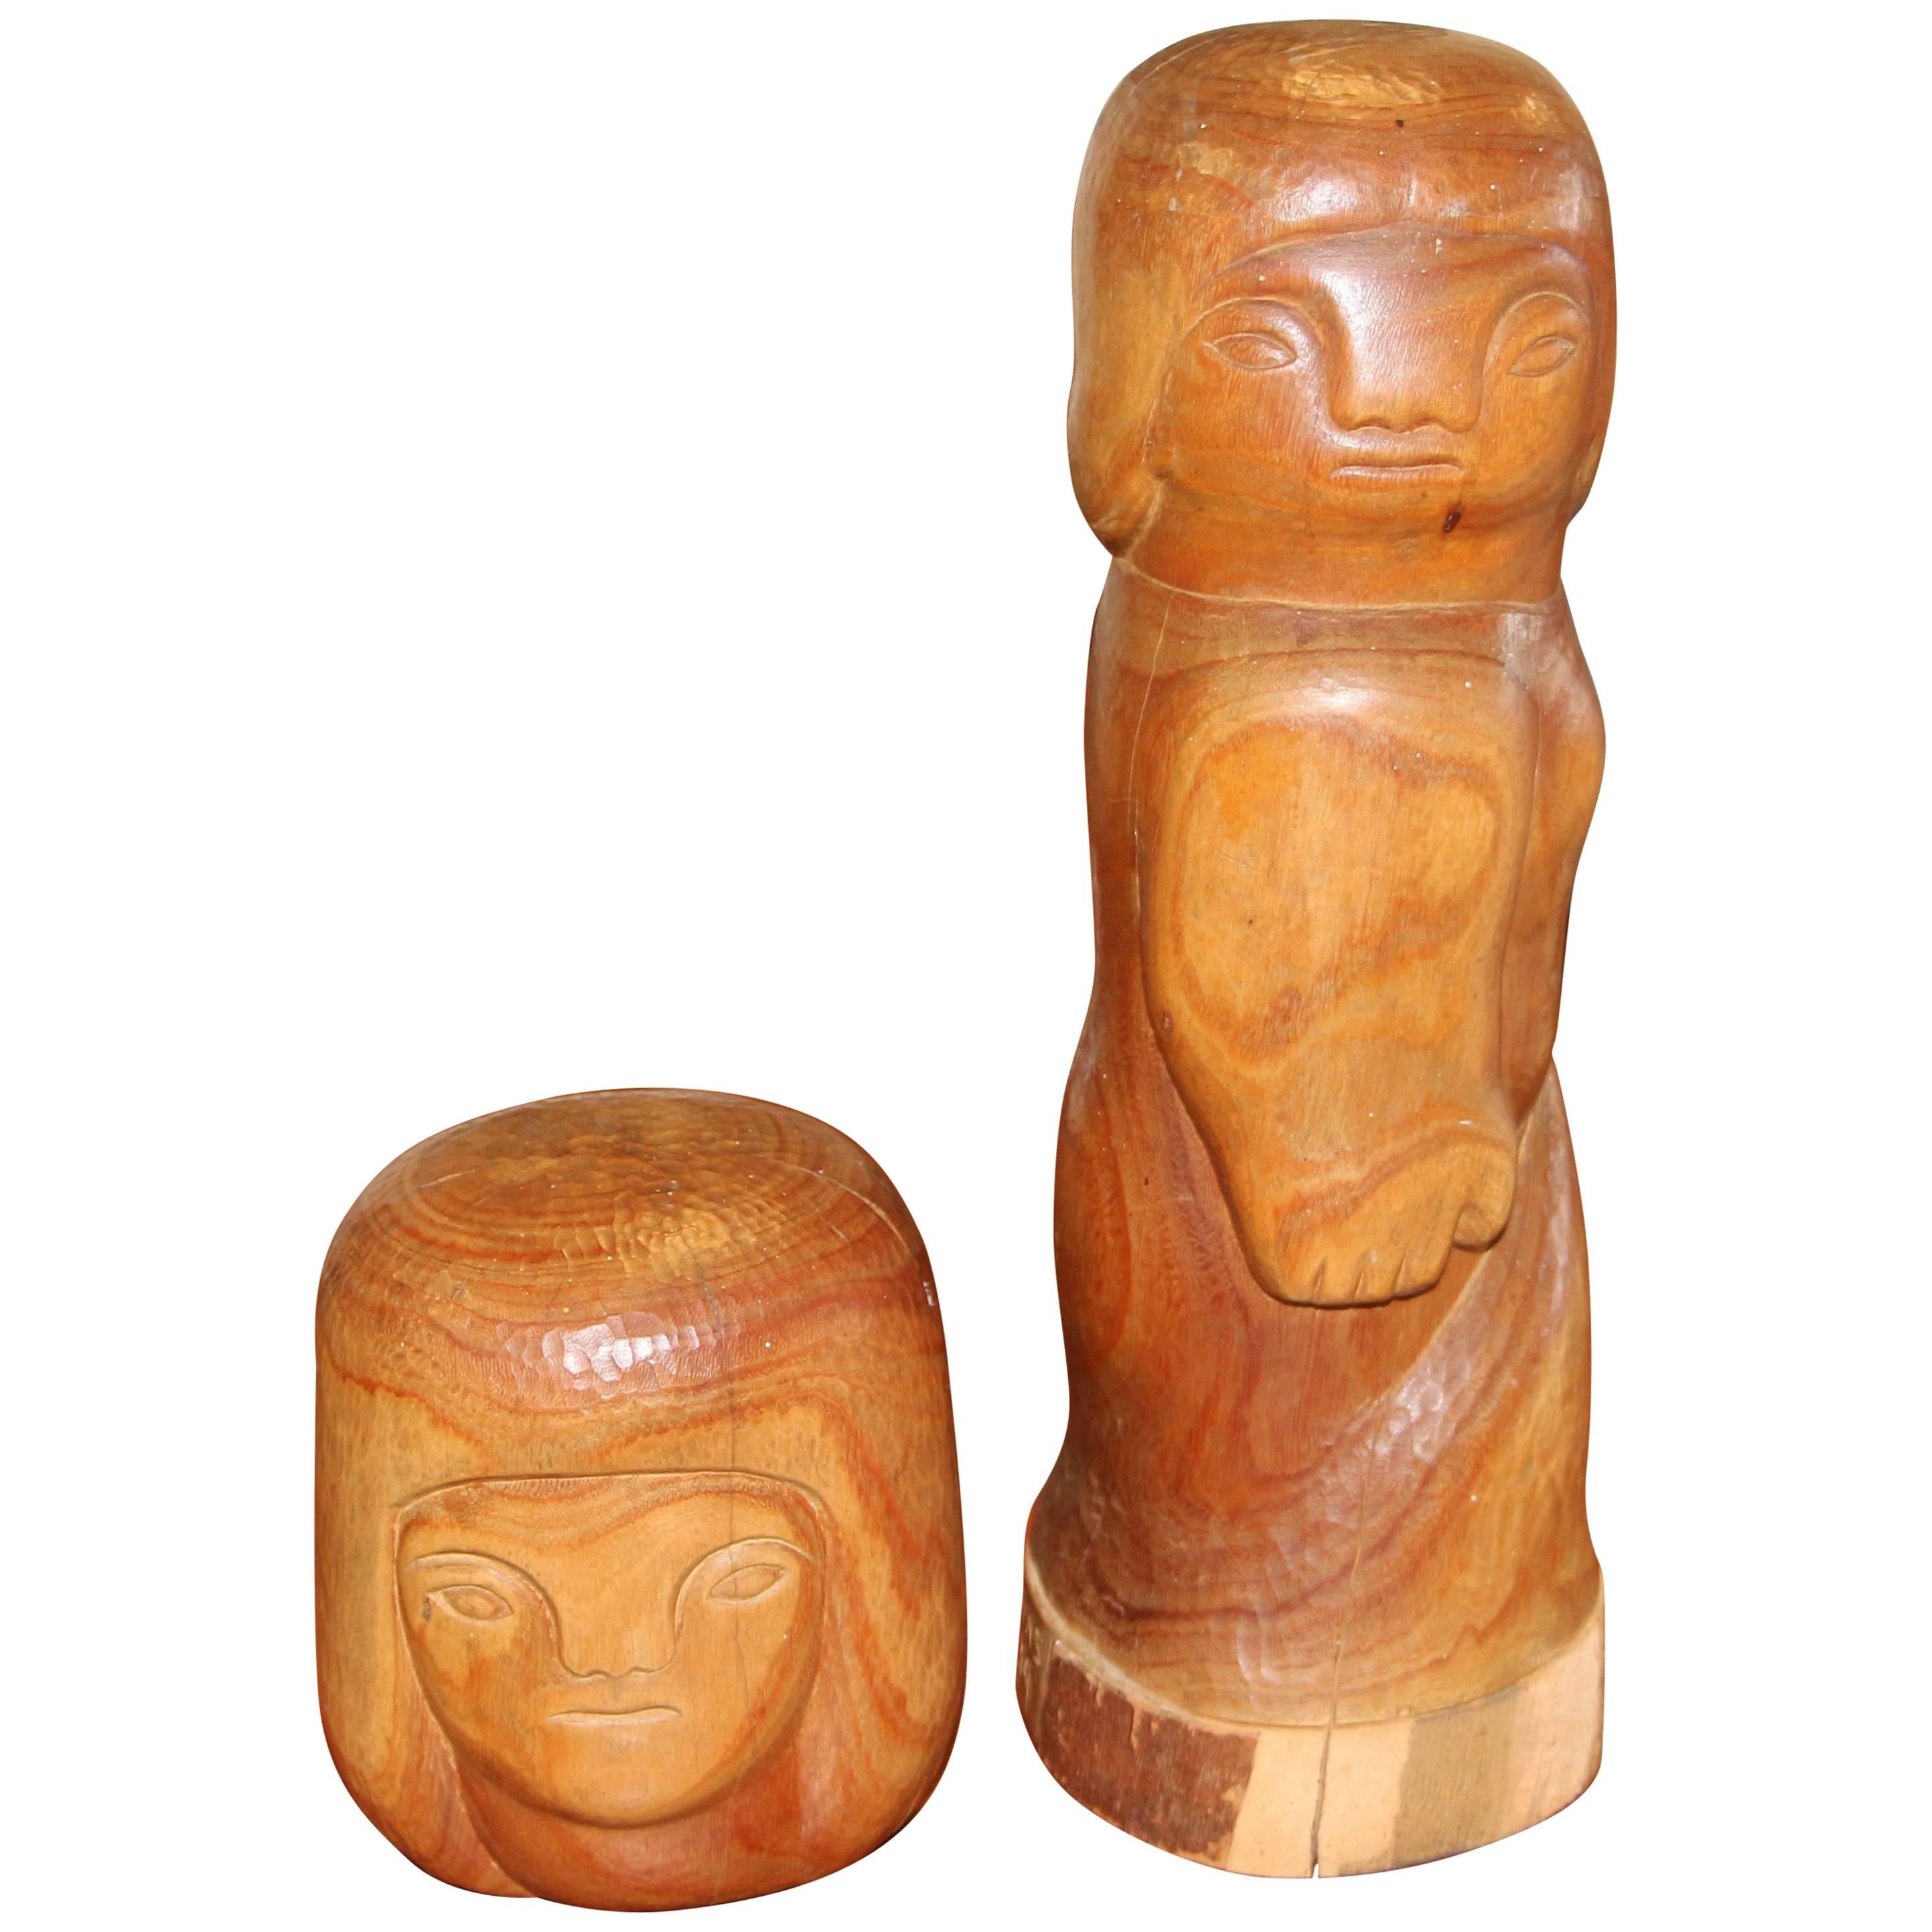 Two Figurative TOTEM Wood Carvings Signed Cardenas, 1939